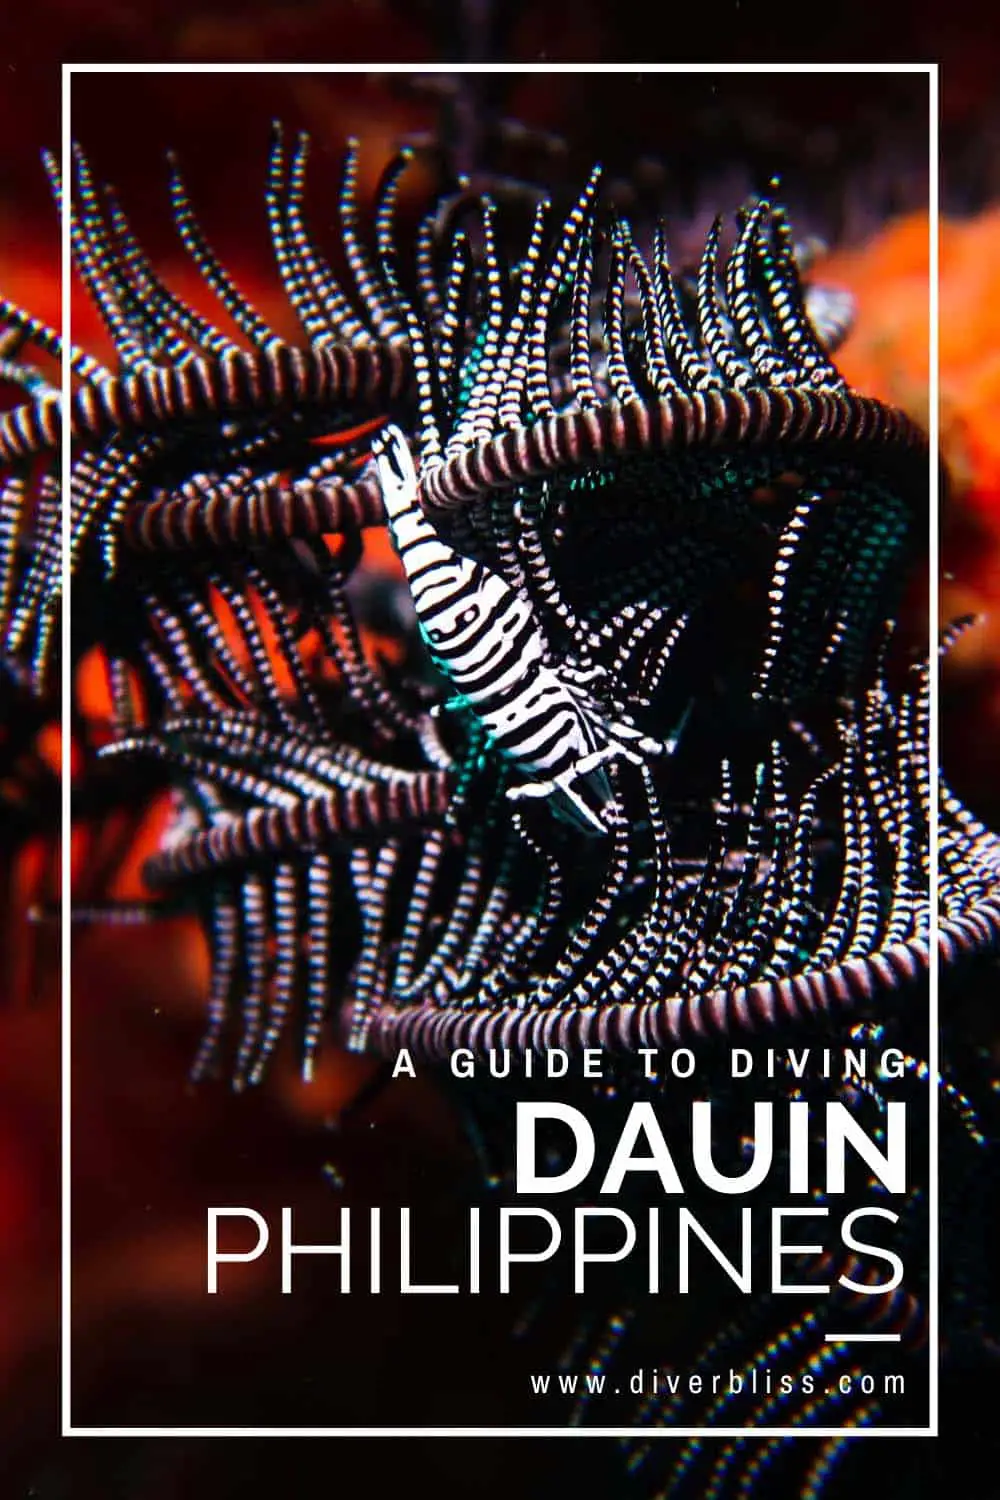 A guide to diving Dauin Philippines